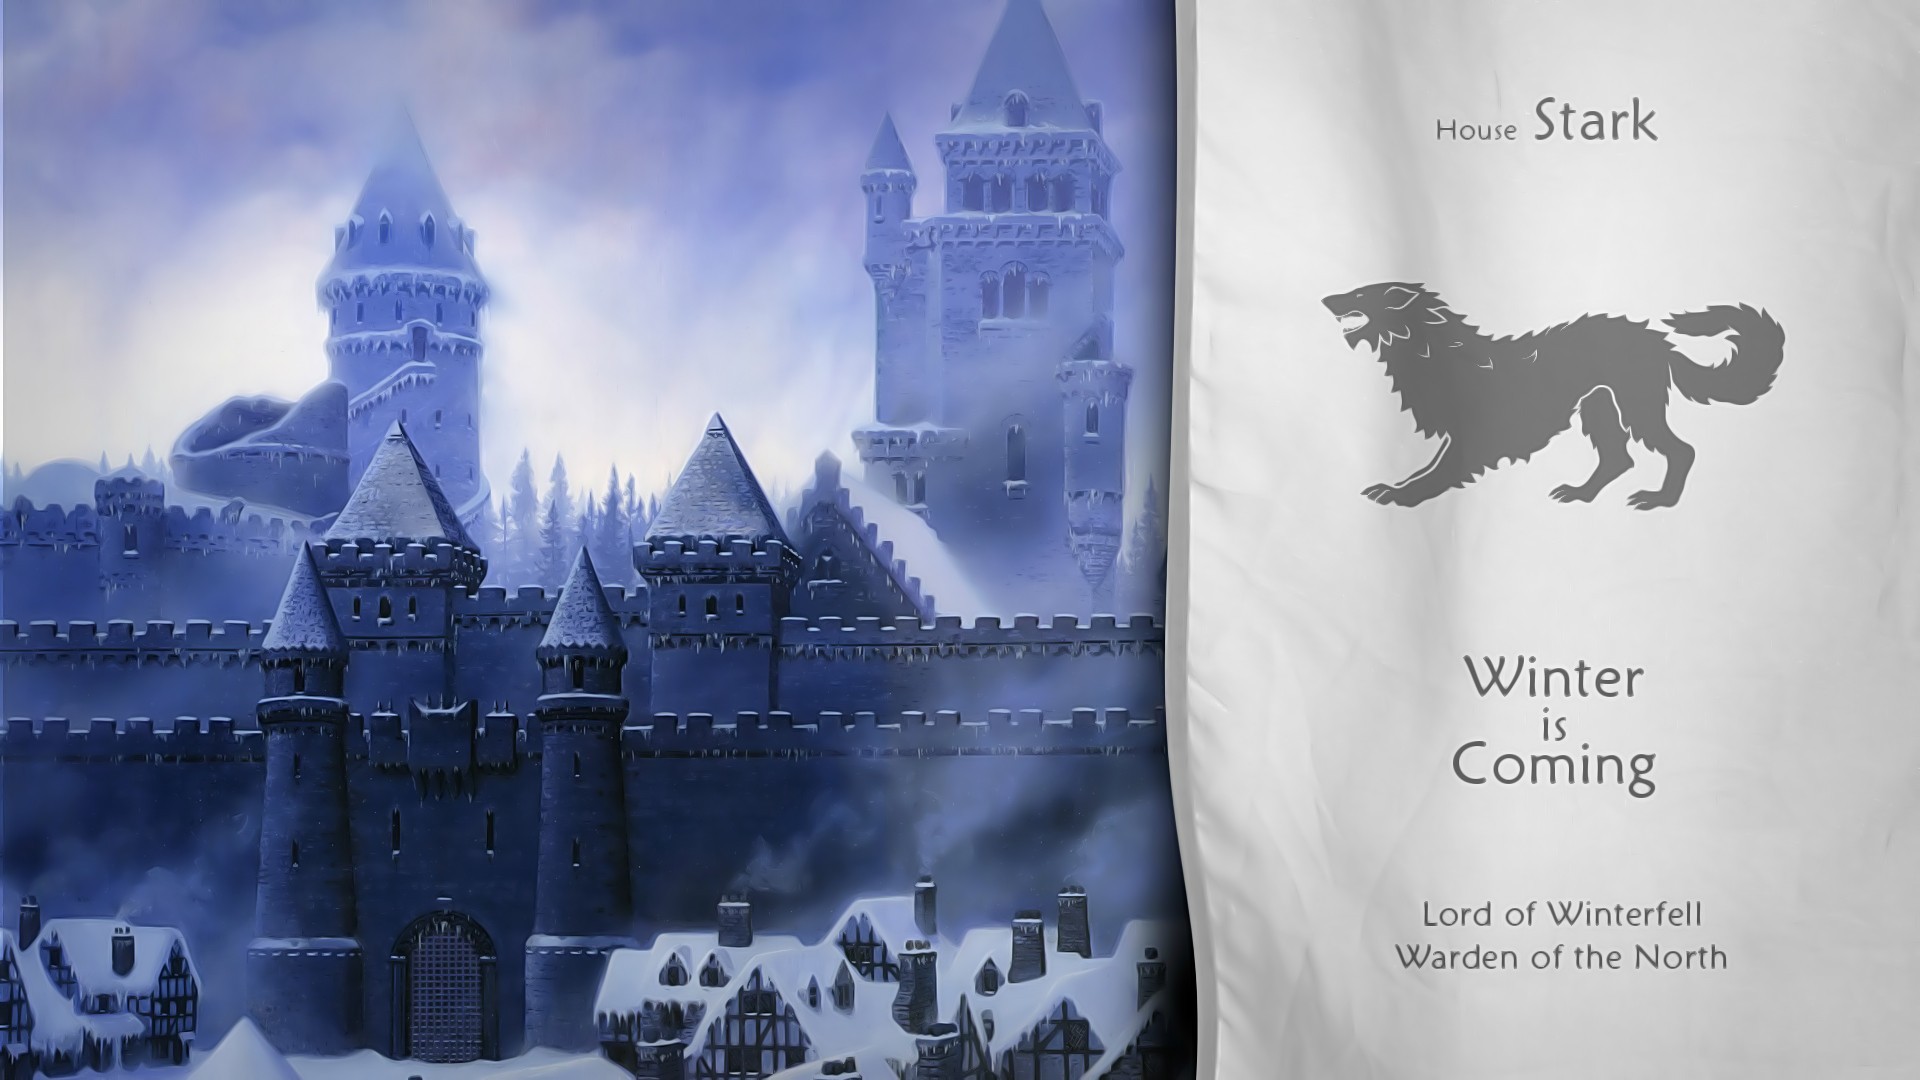 1920x1080  game of thrones castle winterfell house stark wallpaper and  background JPG 250 kB